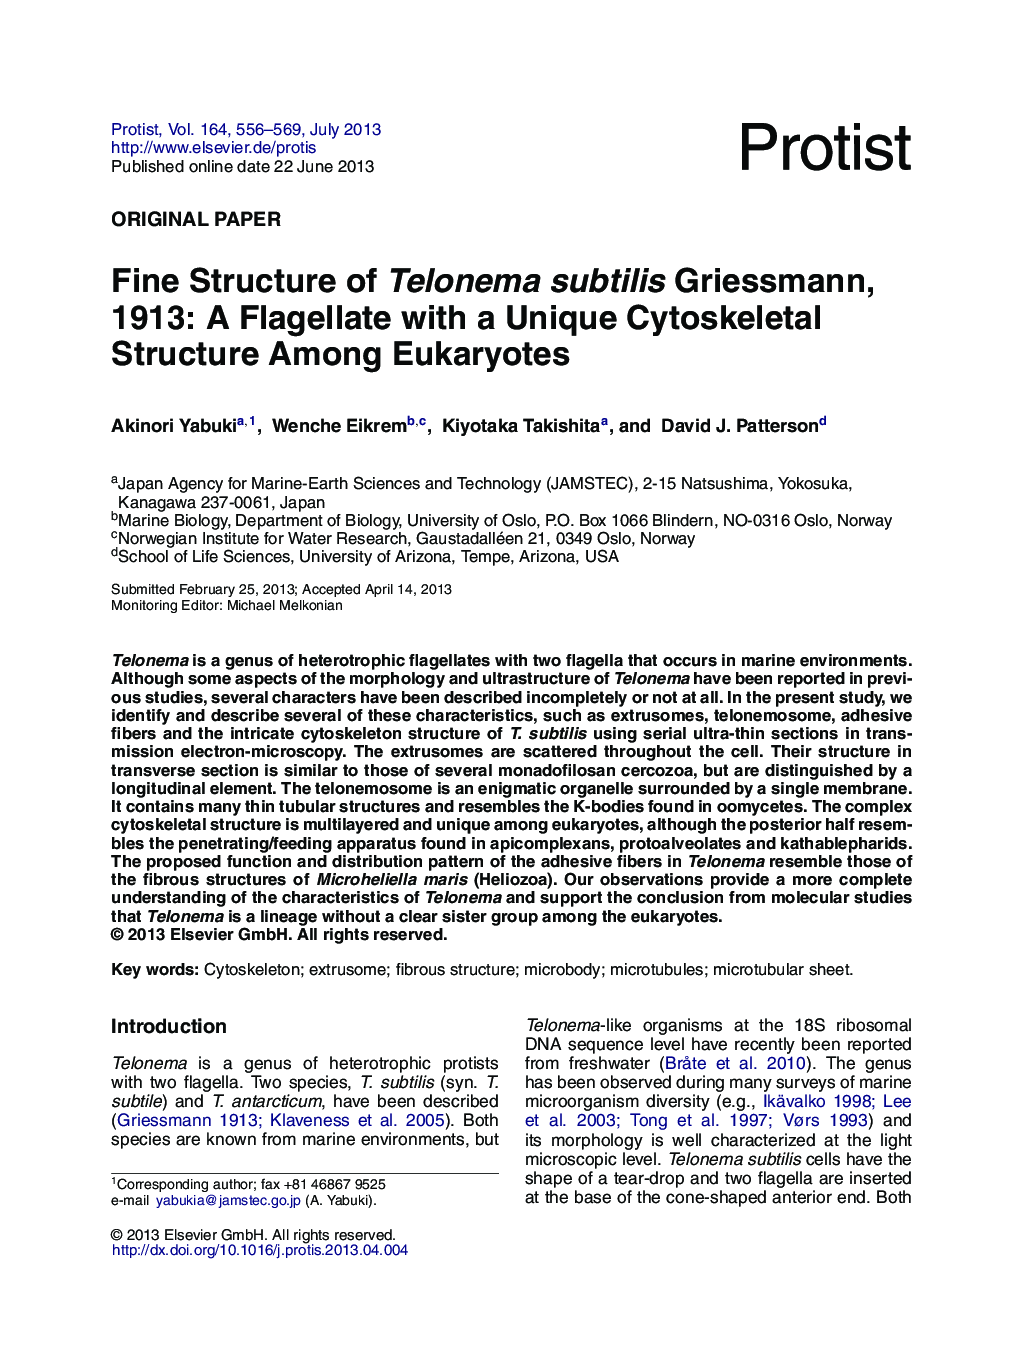 Fine Structure of Telonema subtilis Griessmann, 1913: A Flagellate with a Unique Cytoskeletal Structure Among Eukaryotes